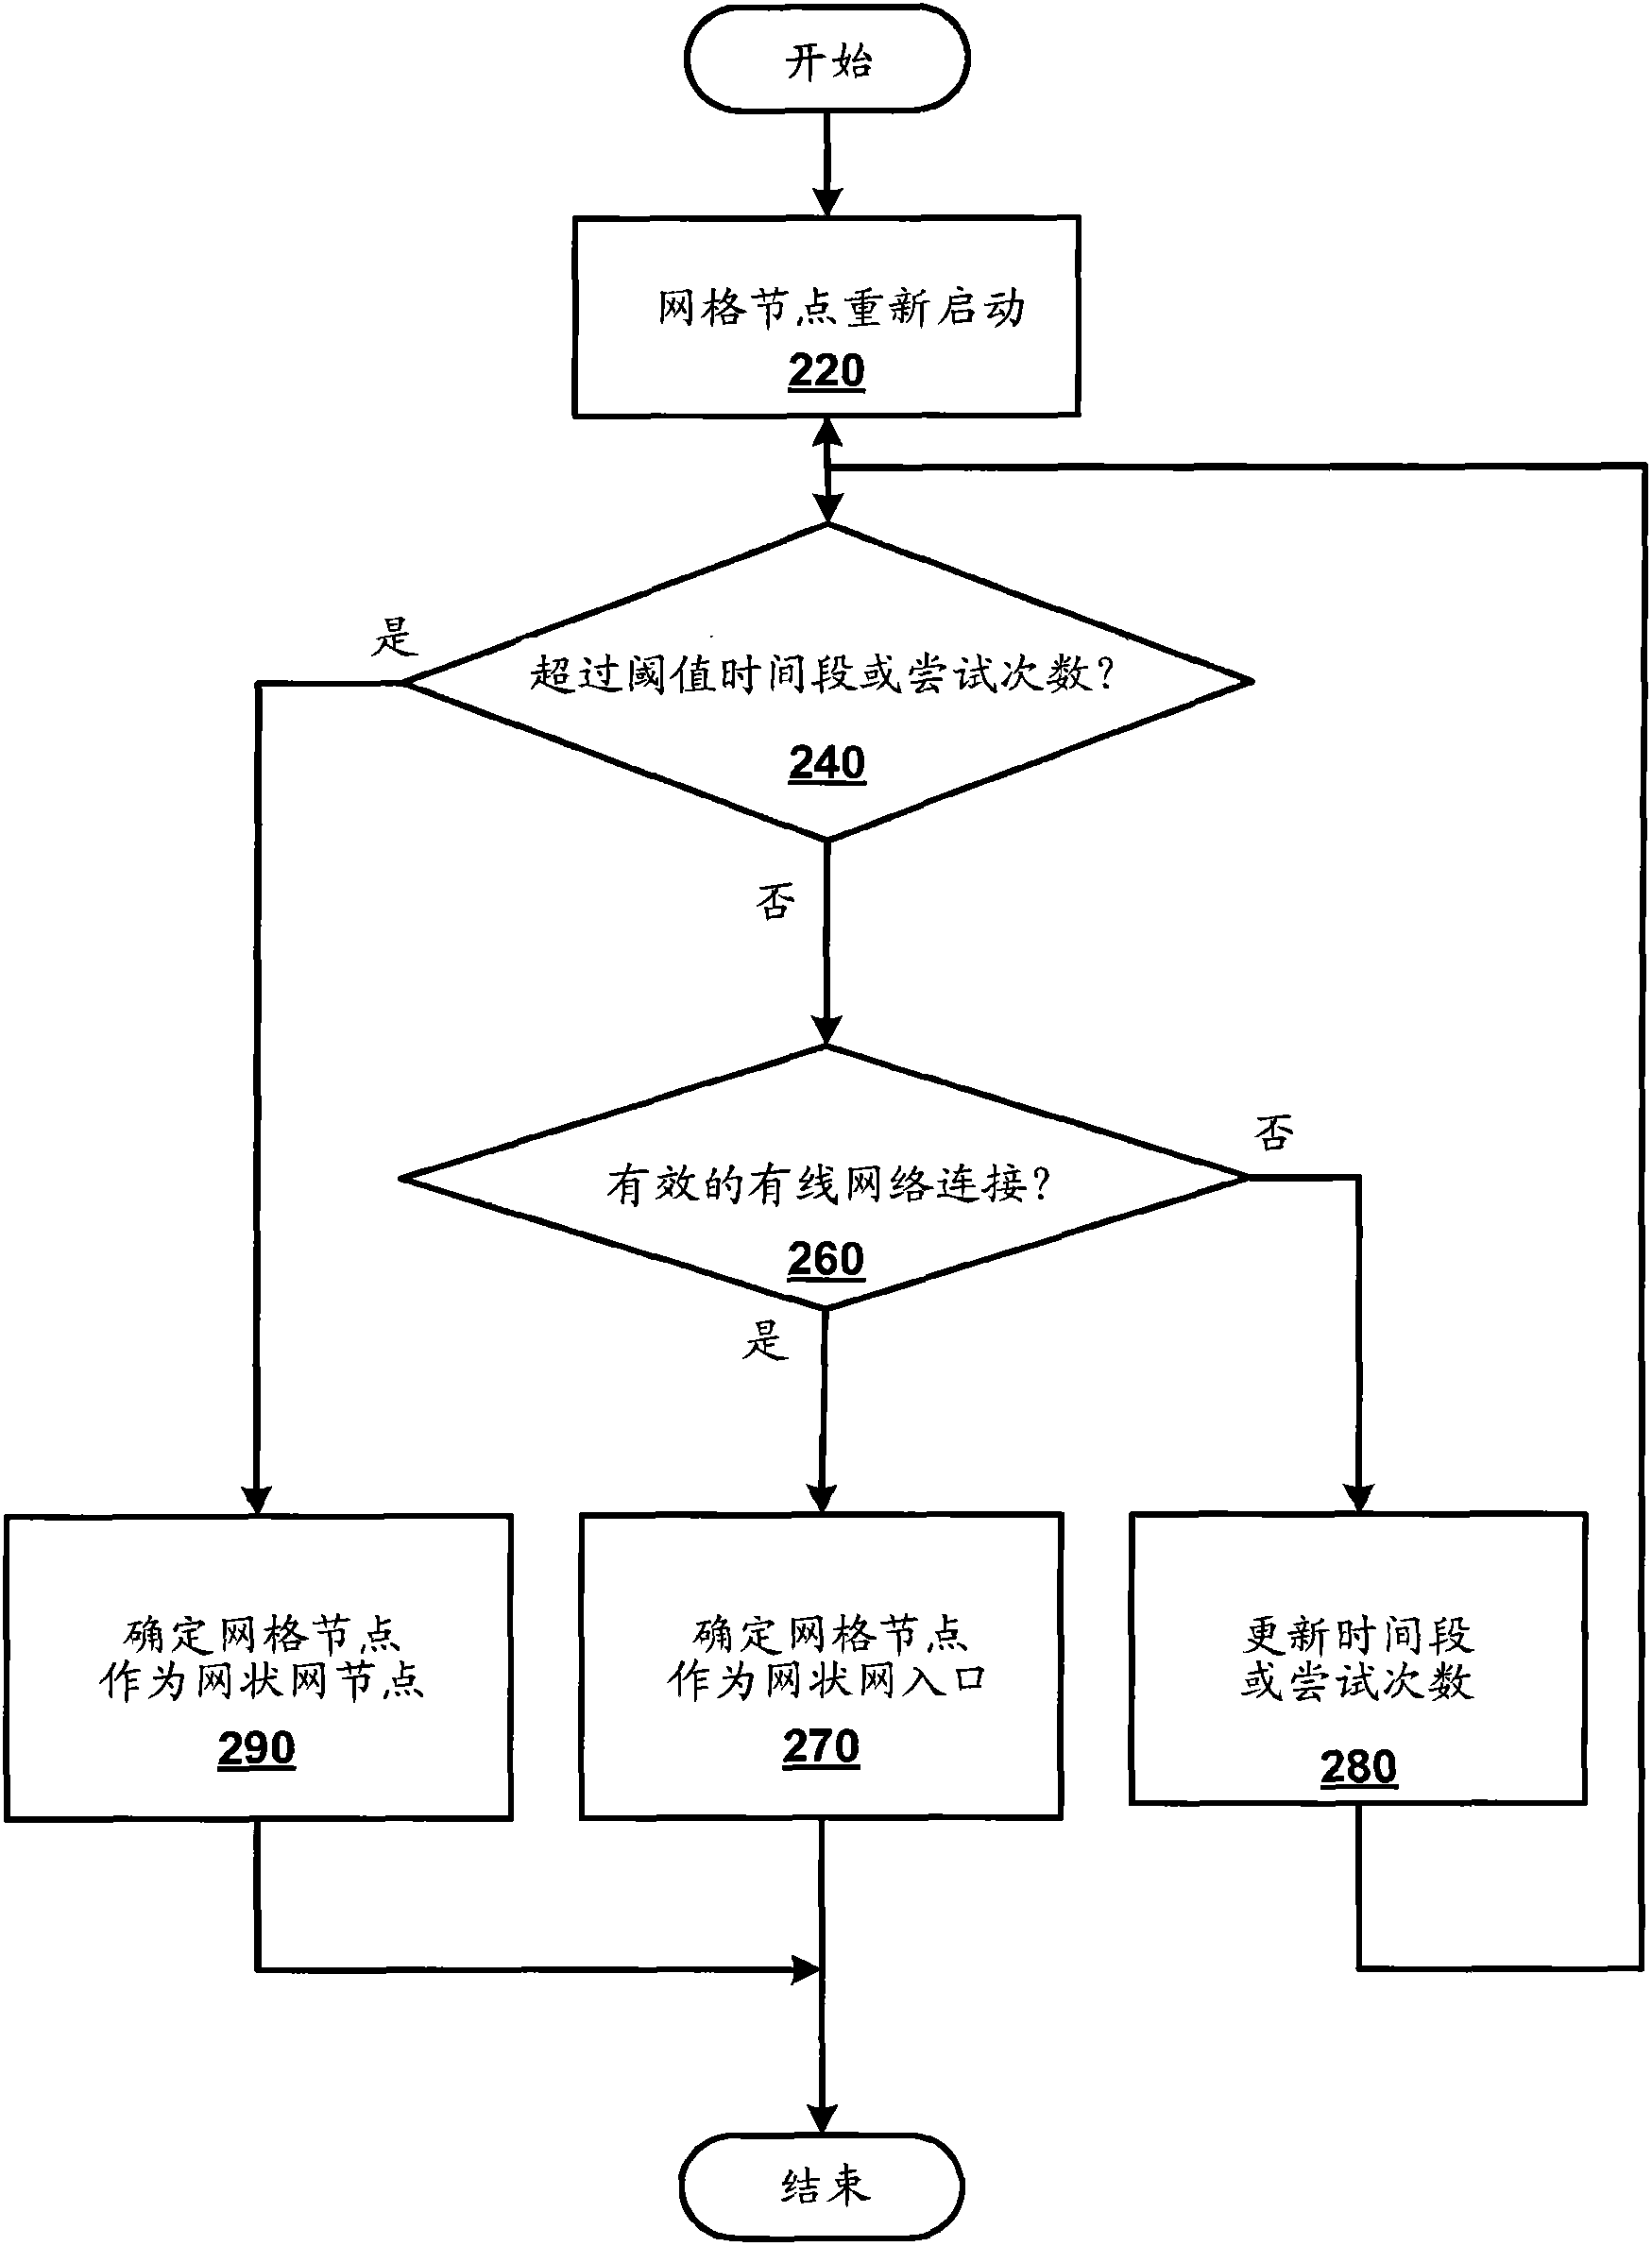 Method and equipment for role discovery and automatic wireless configuration of grid nodes